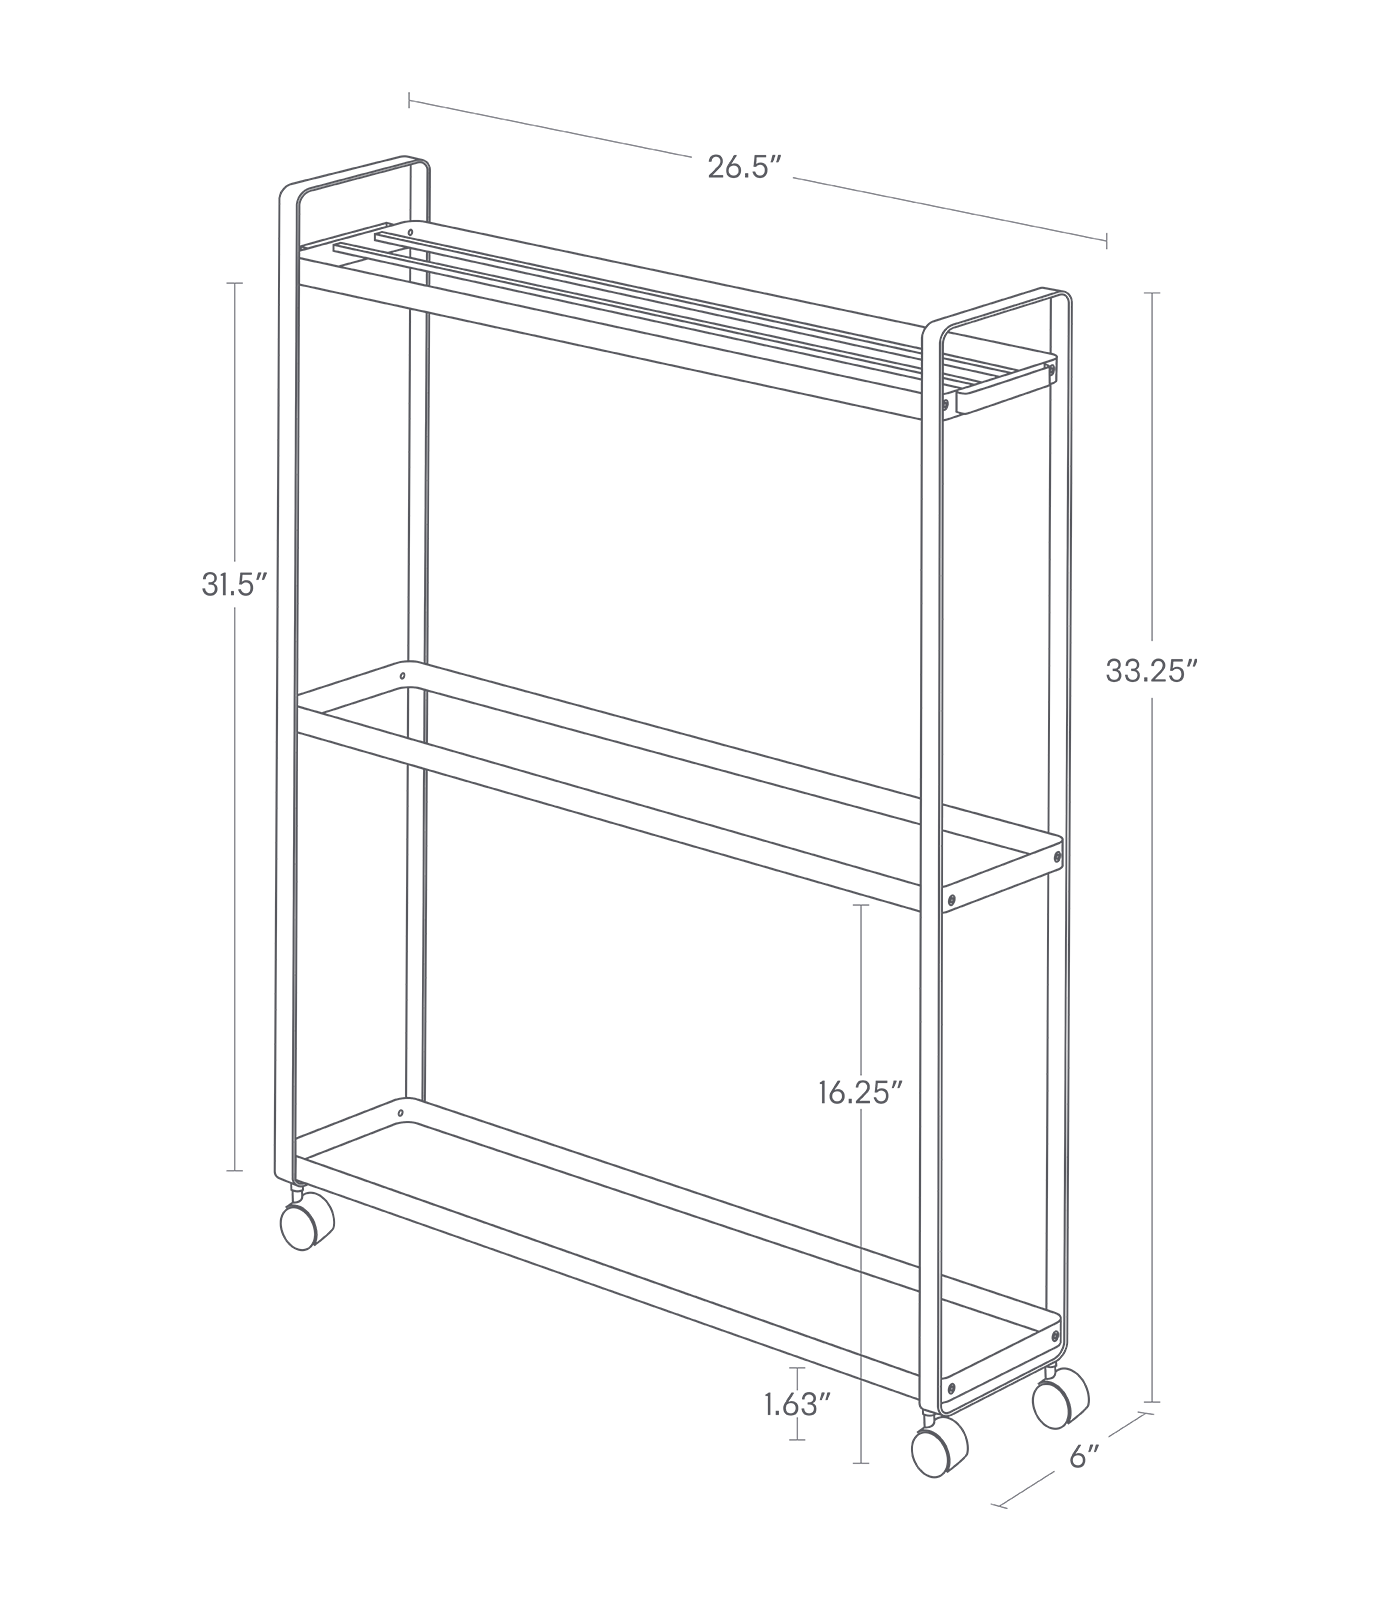 TOWER Rolling Tower Rack. 33.25 inches tall, 26. 5 inches long, 6 inches wide.